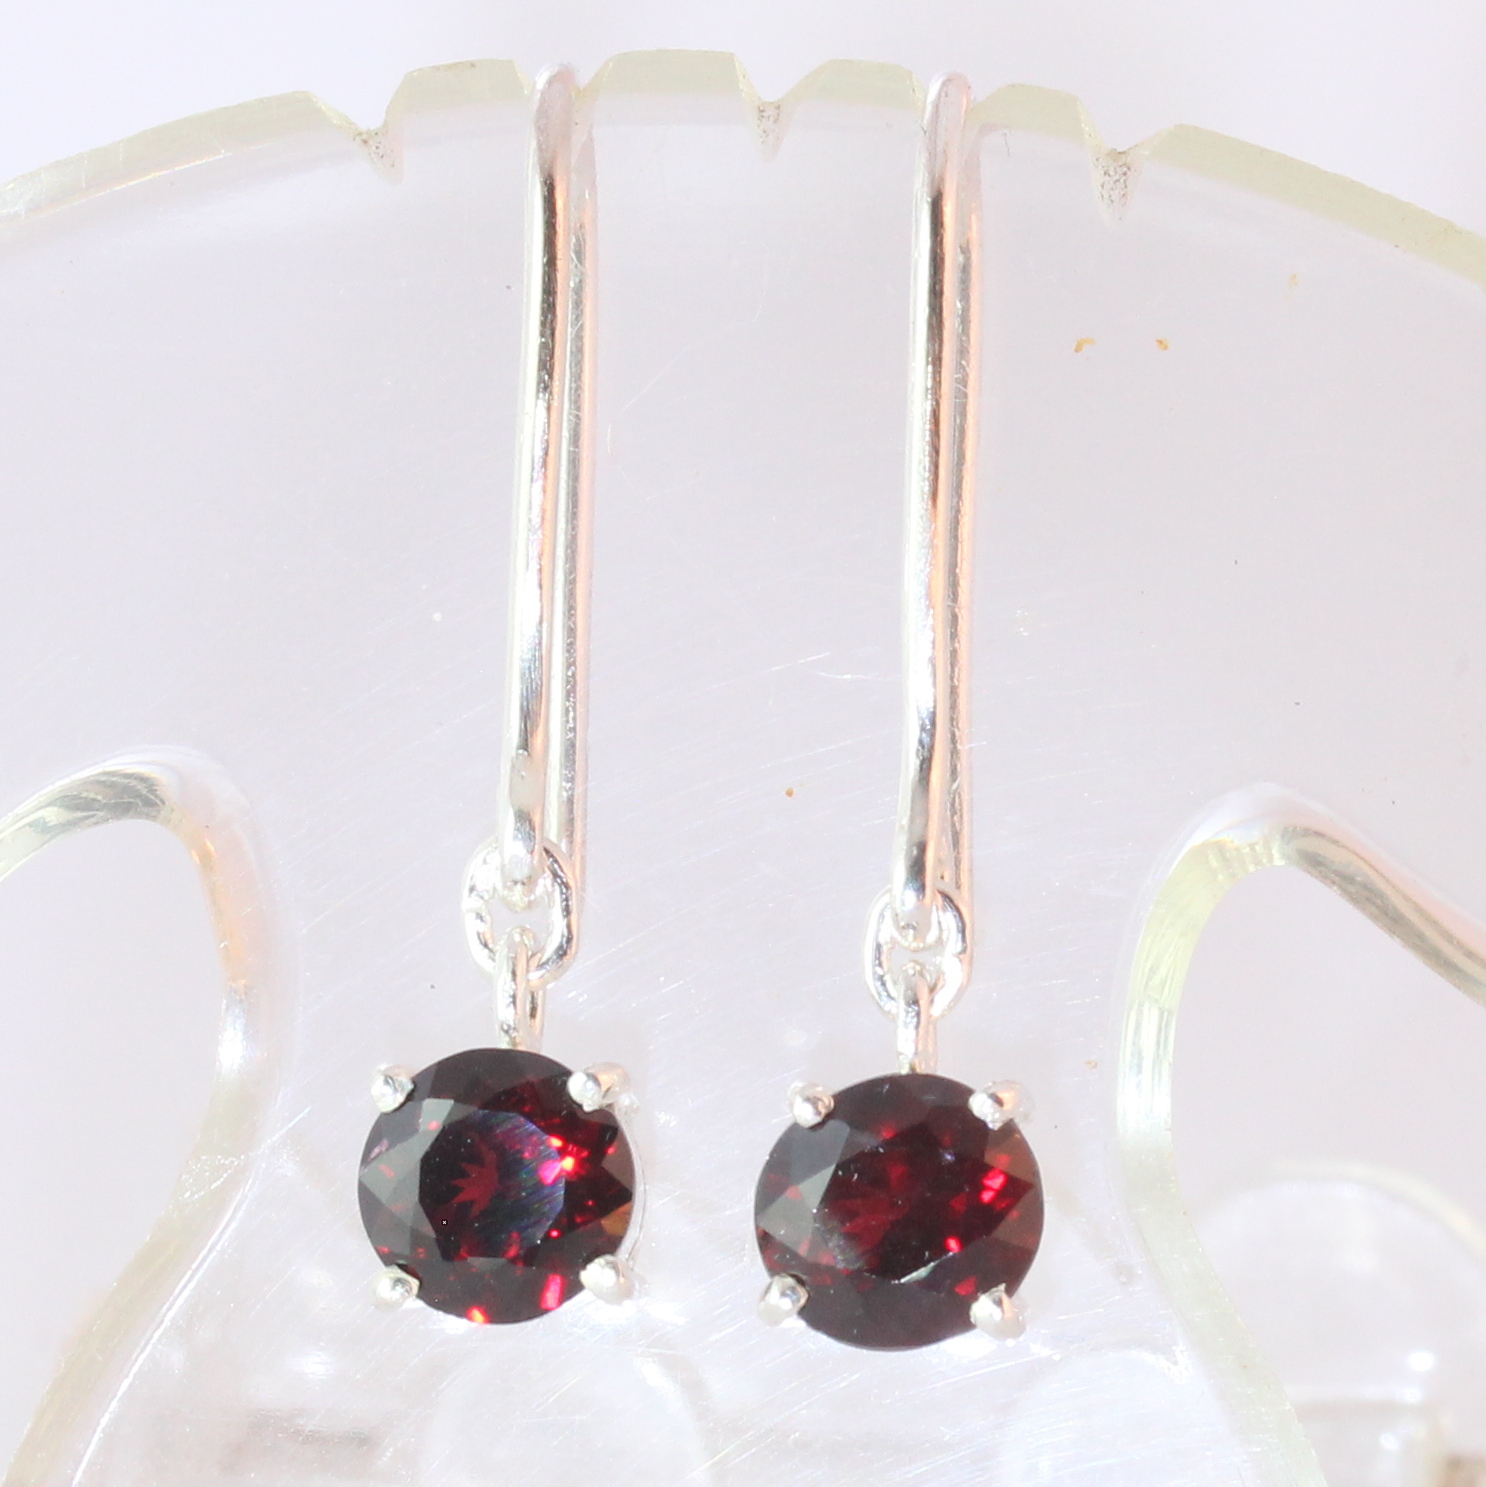 Earring Pair Red Garnet Untreated Rounds Sterling Silver Dangle Hook Design 582